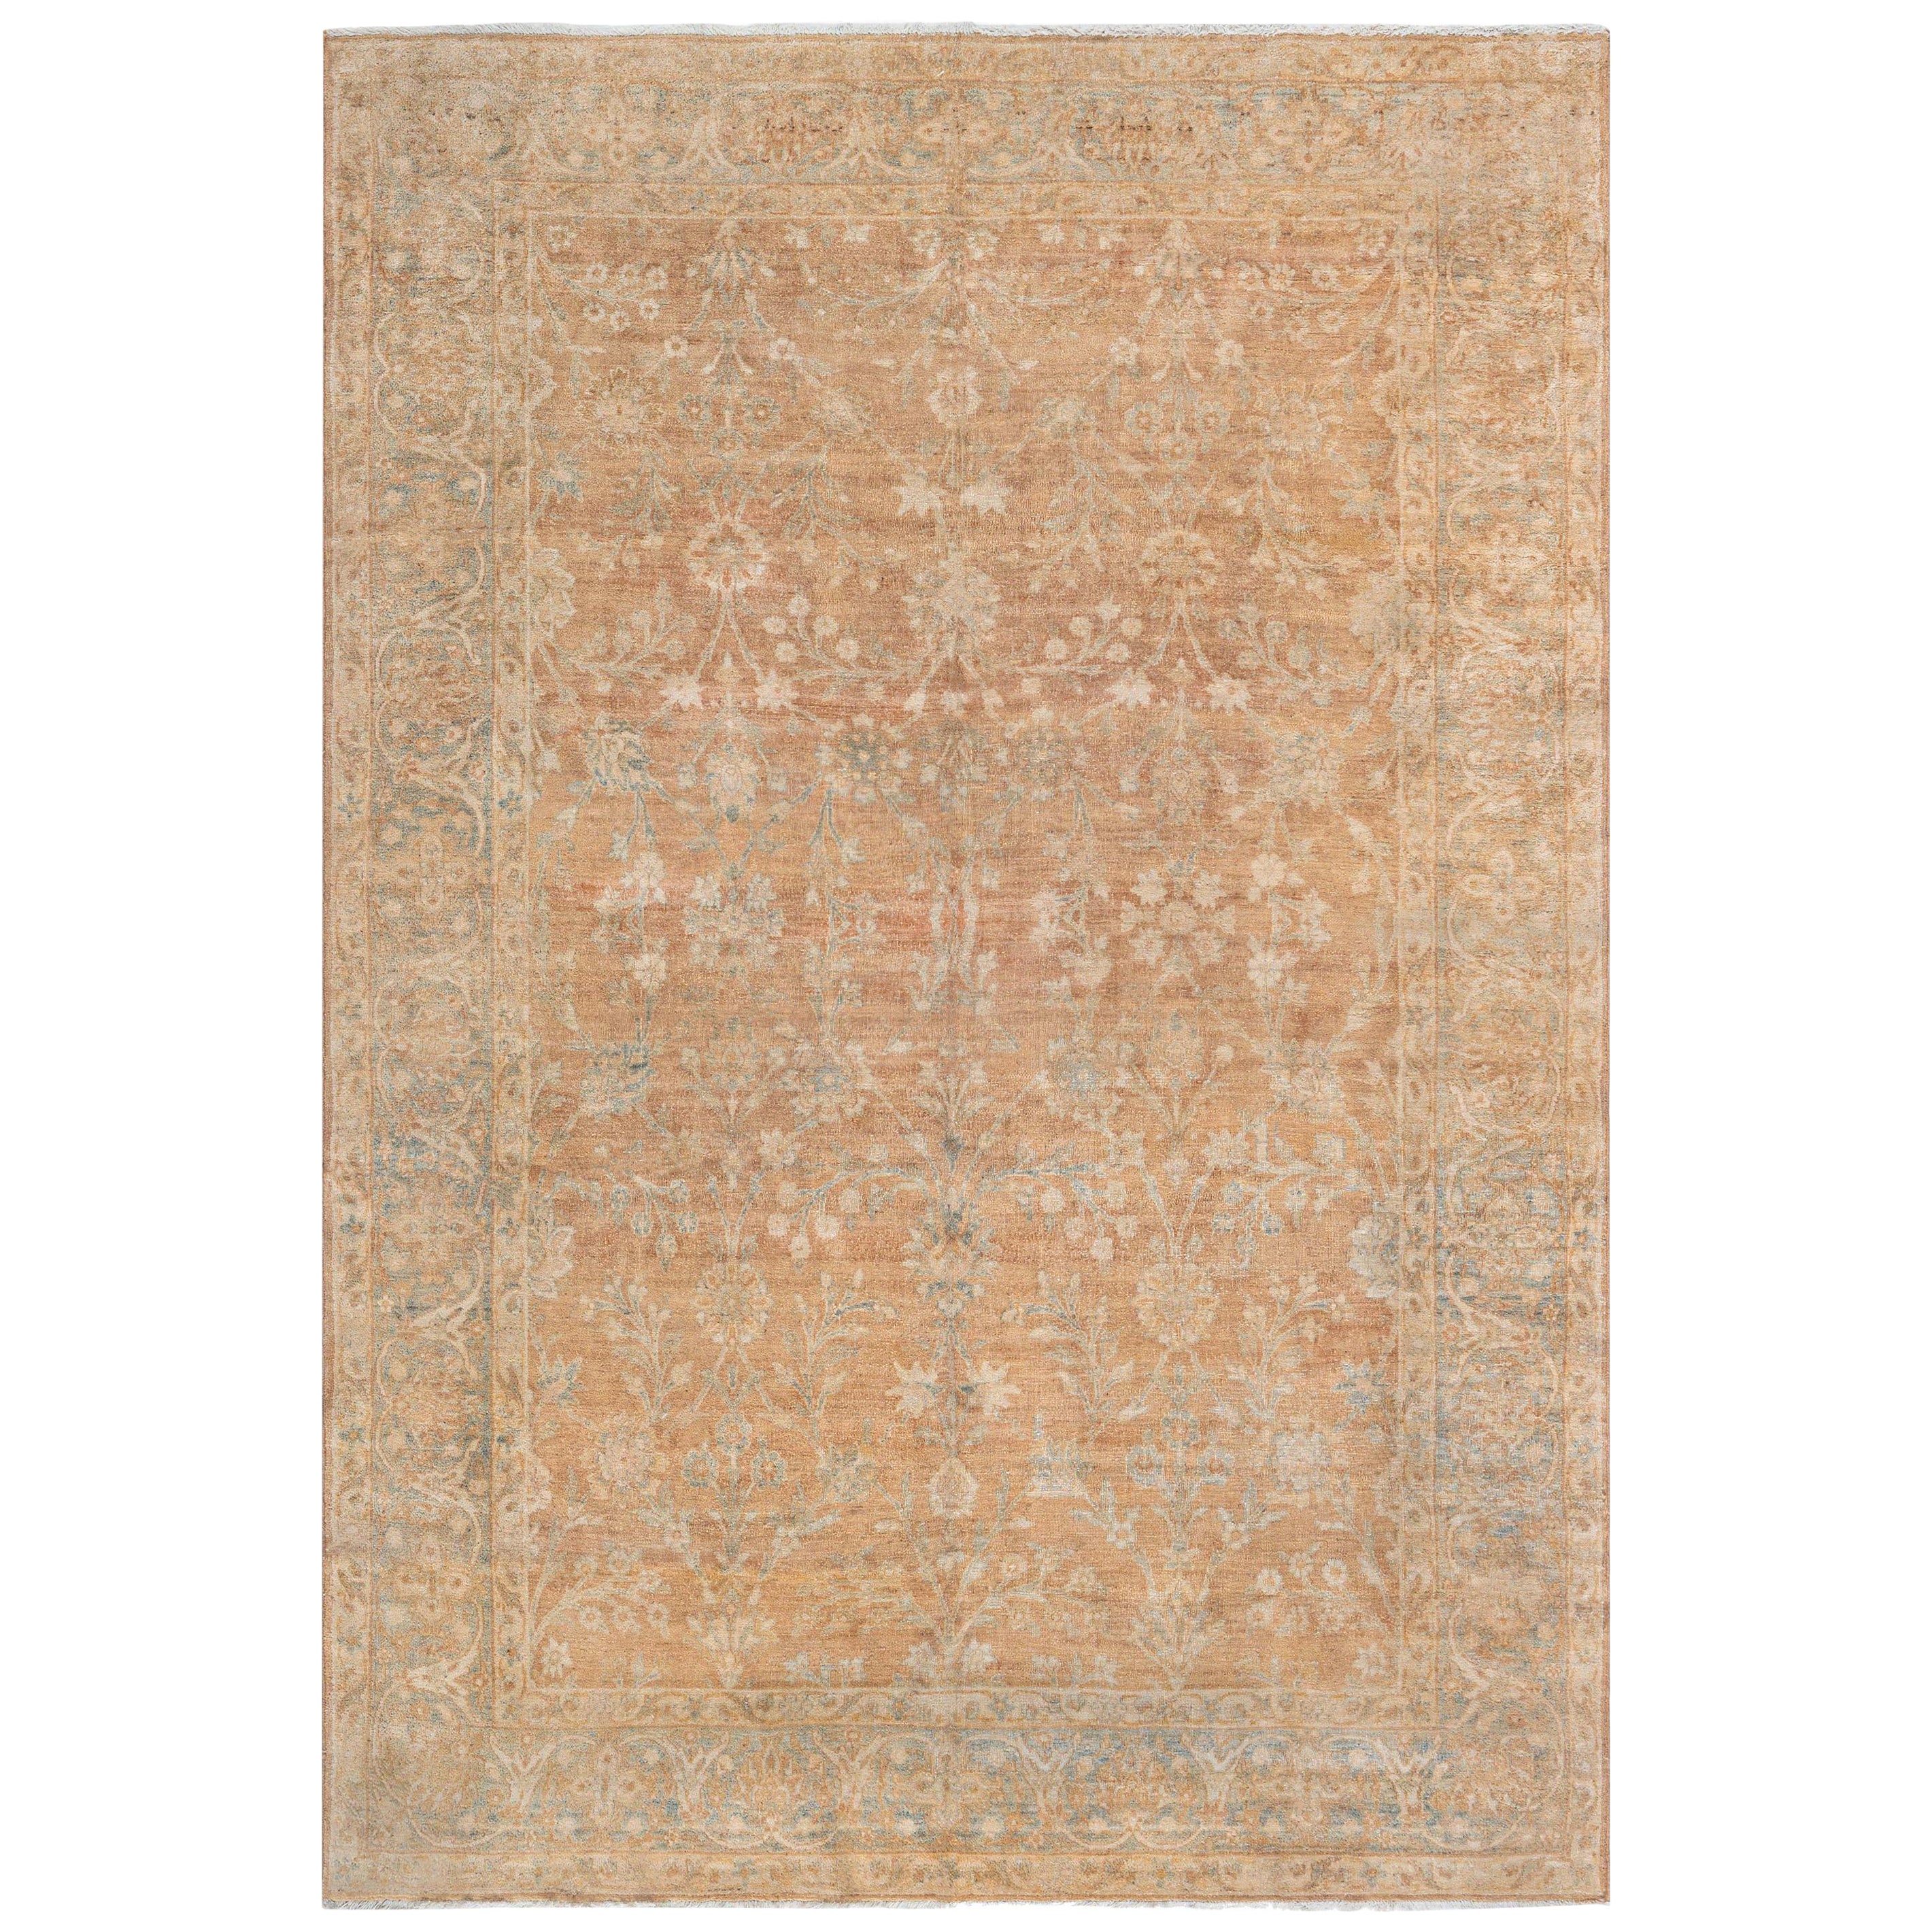 Antique Persian Tabriz Brown Handwoven Wool Carpet For Sale